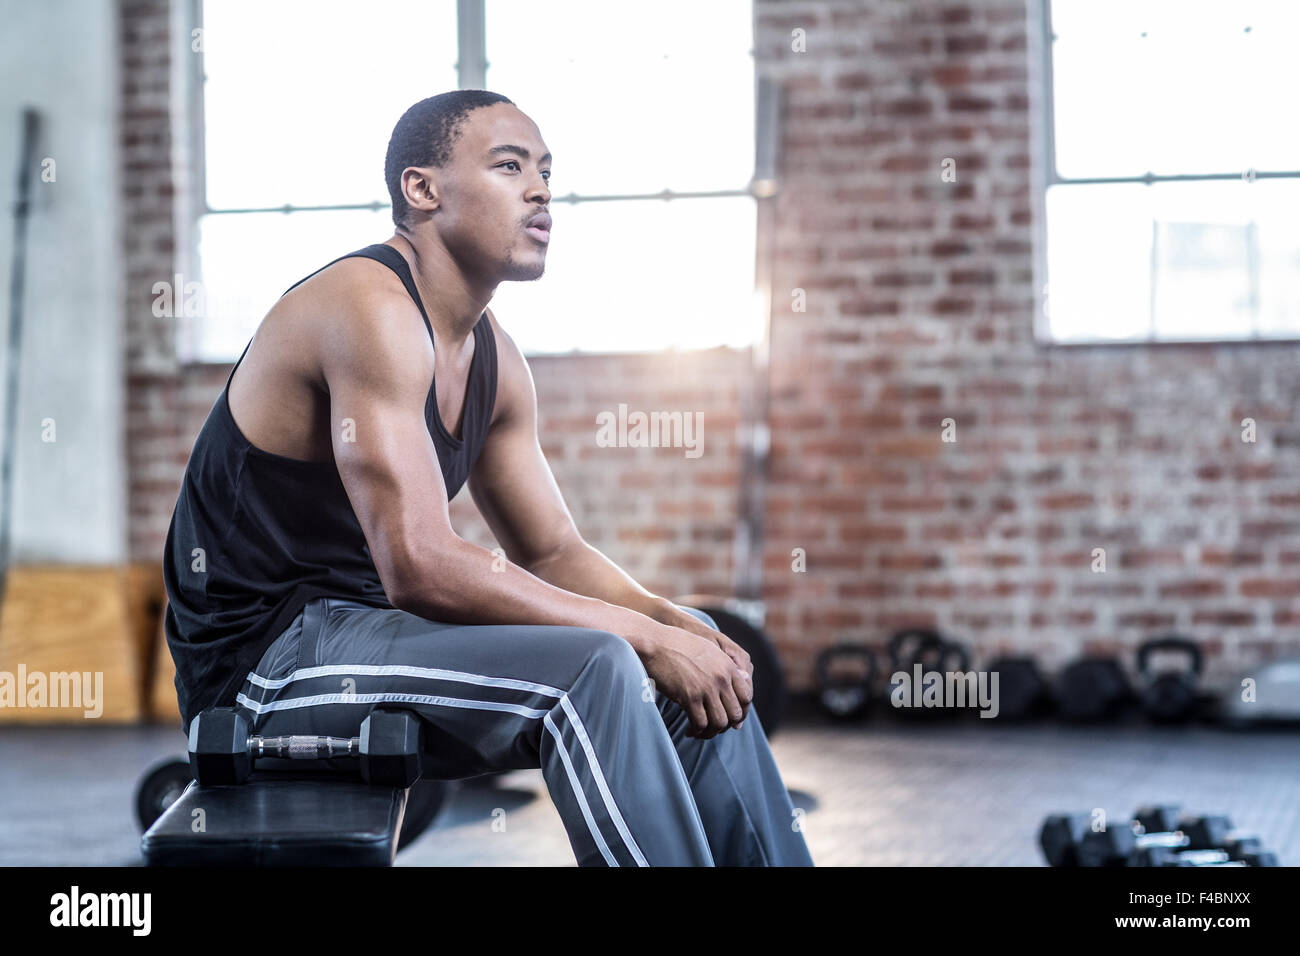 Muscular man sitting on a bench workout Stock Photo